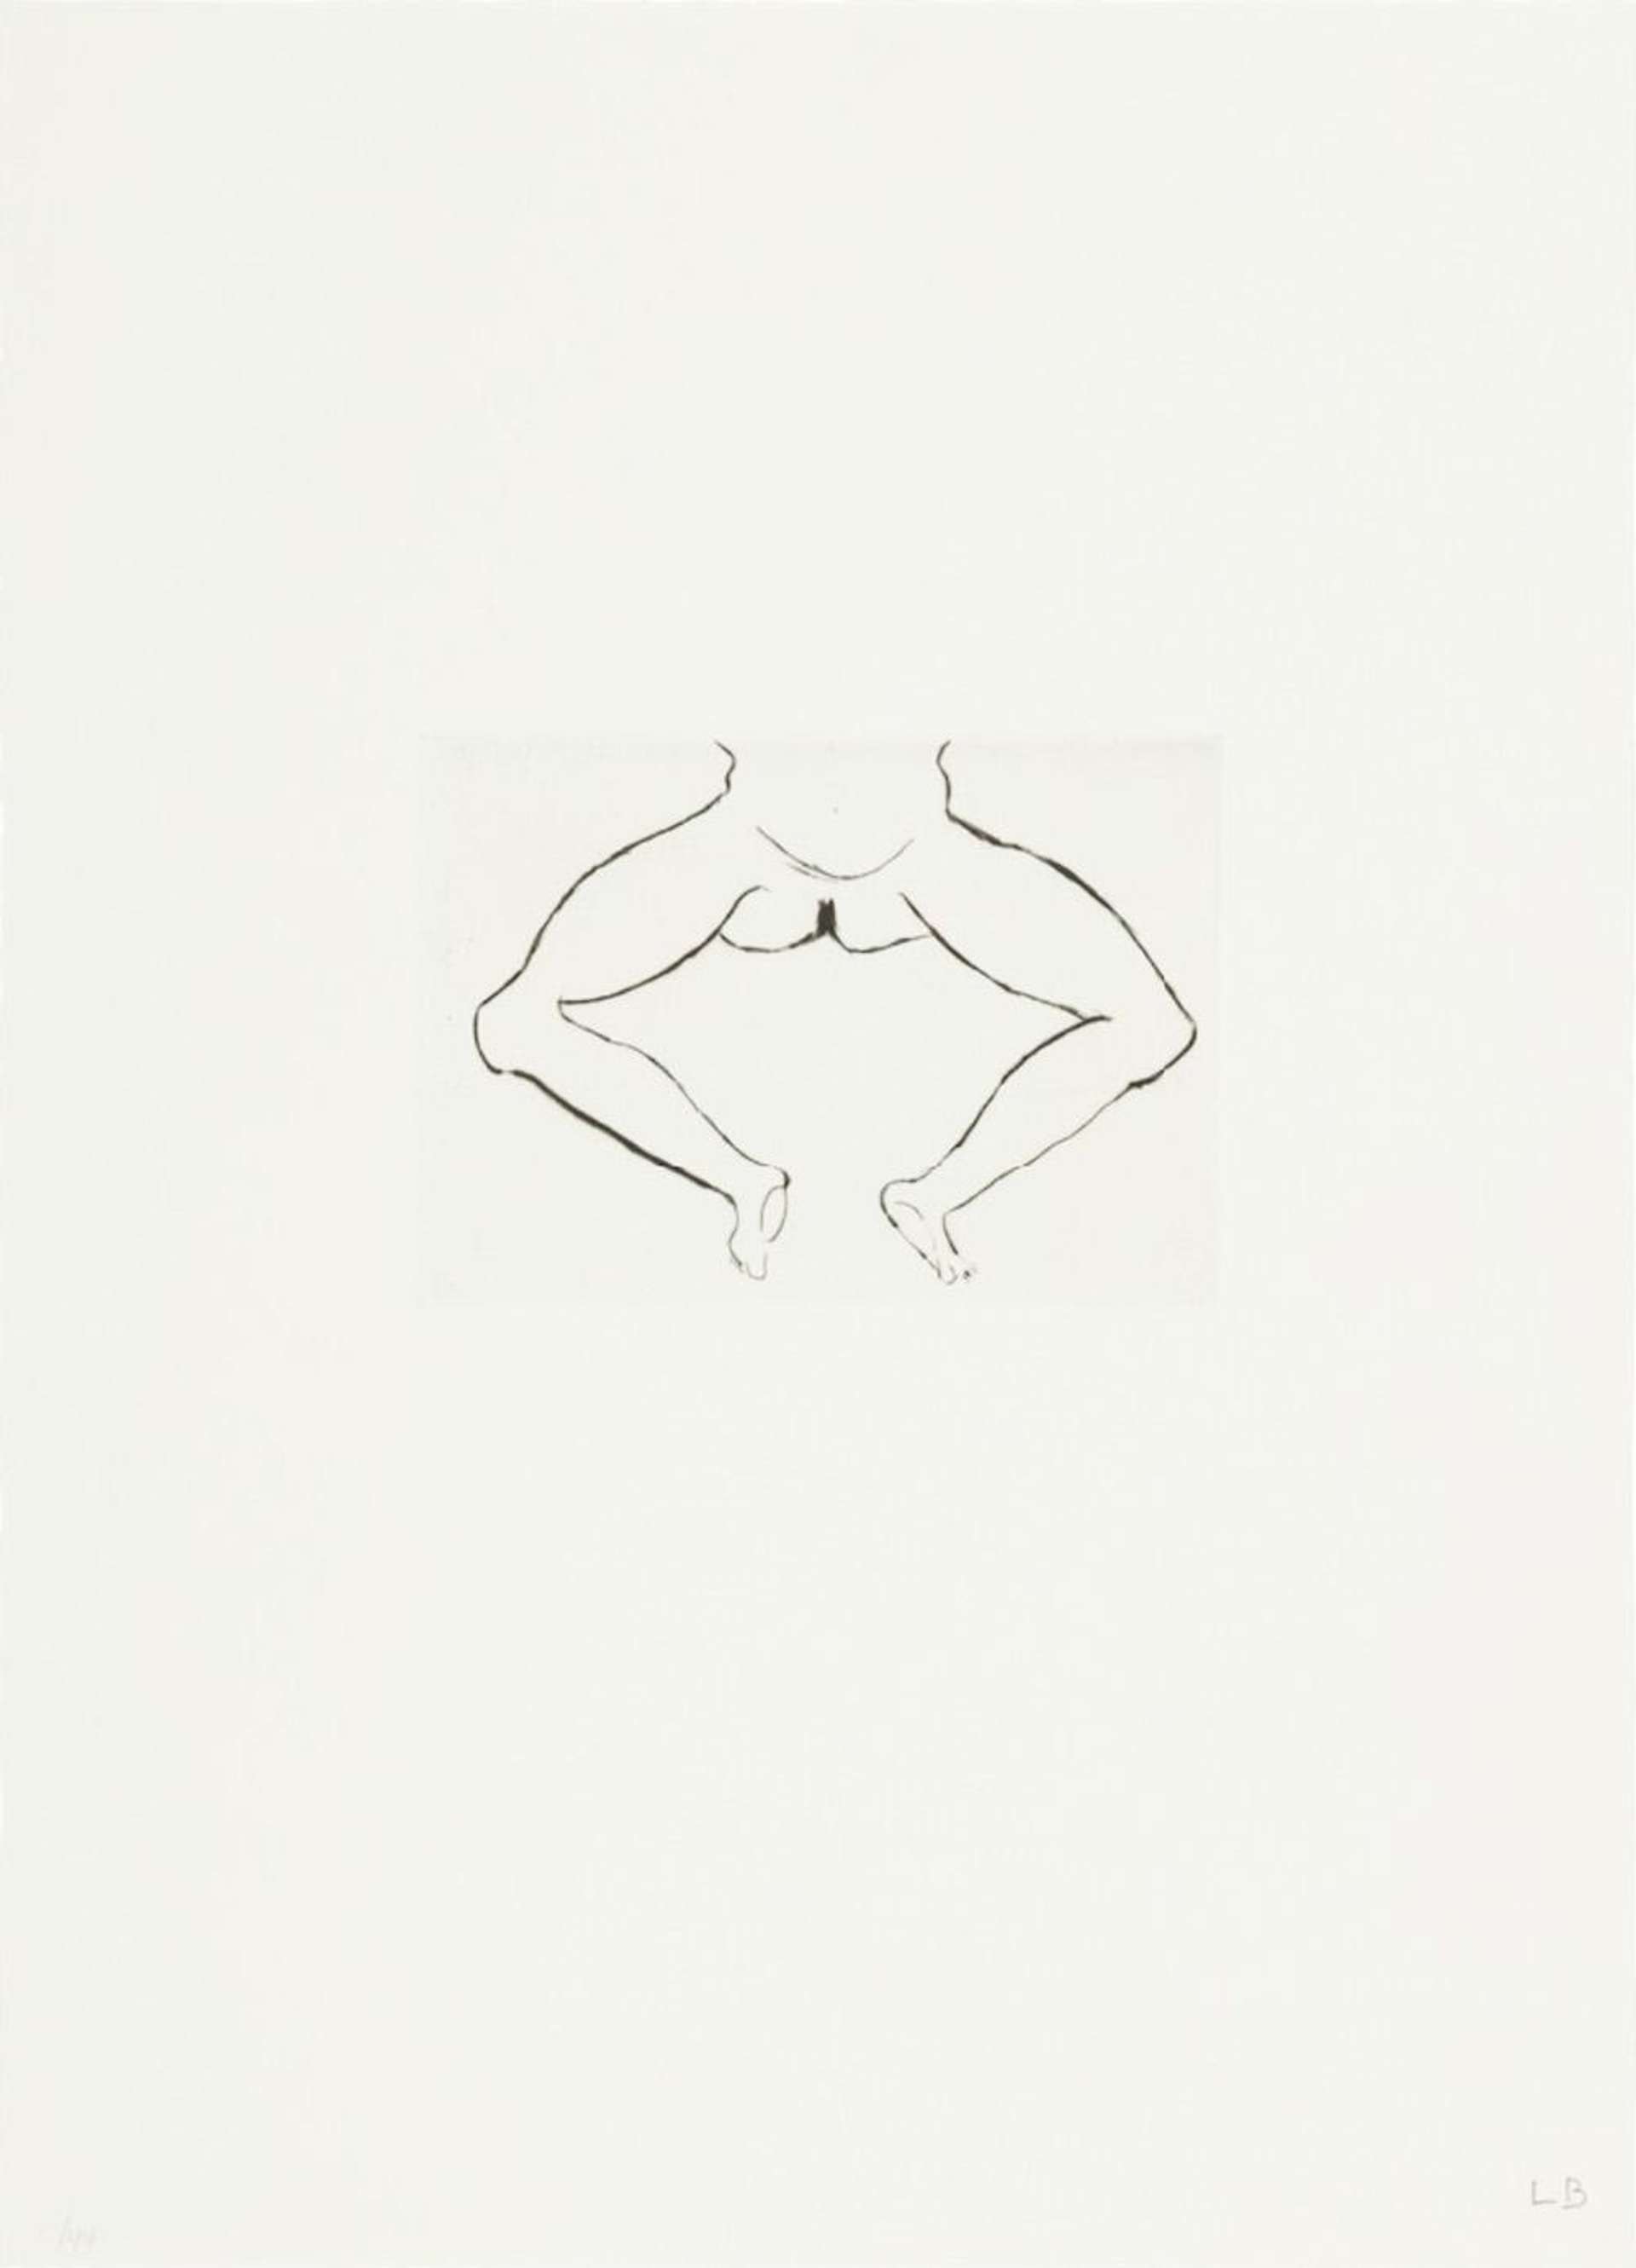 Untitled No. 7 - Signed Print by Louise Bourgeois 1990 - MyArtBroker